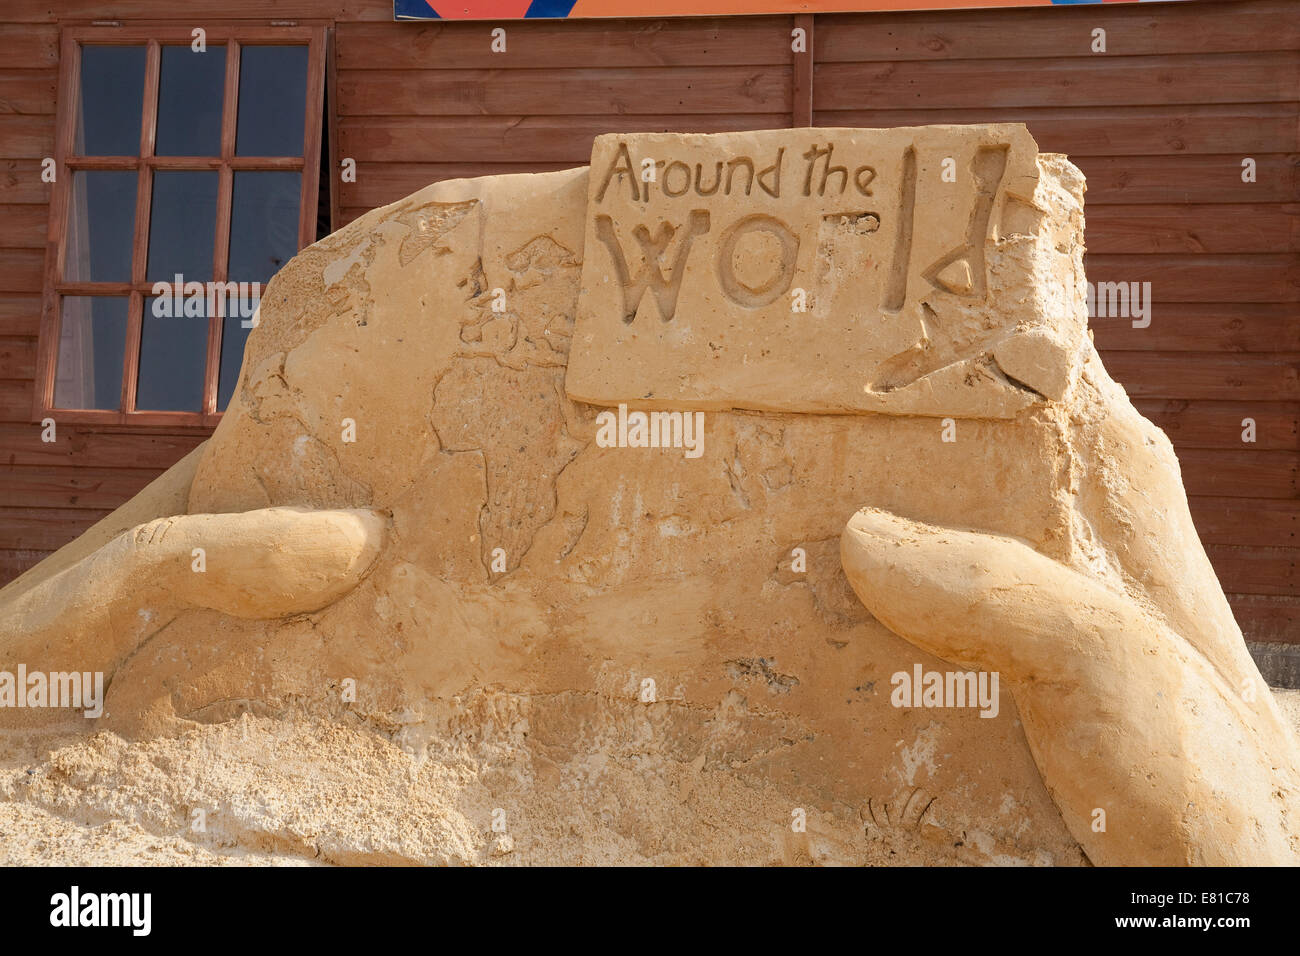 Around the world is this years theme at the Sand Sculpture festival in Brighton Stock Photo